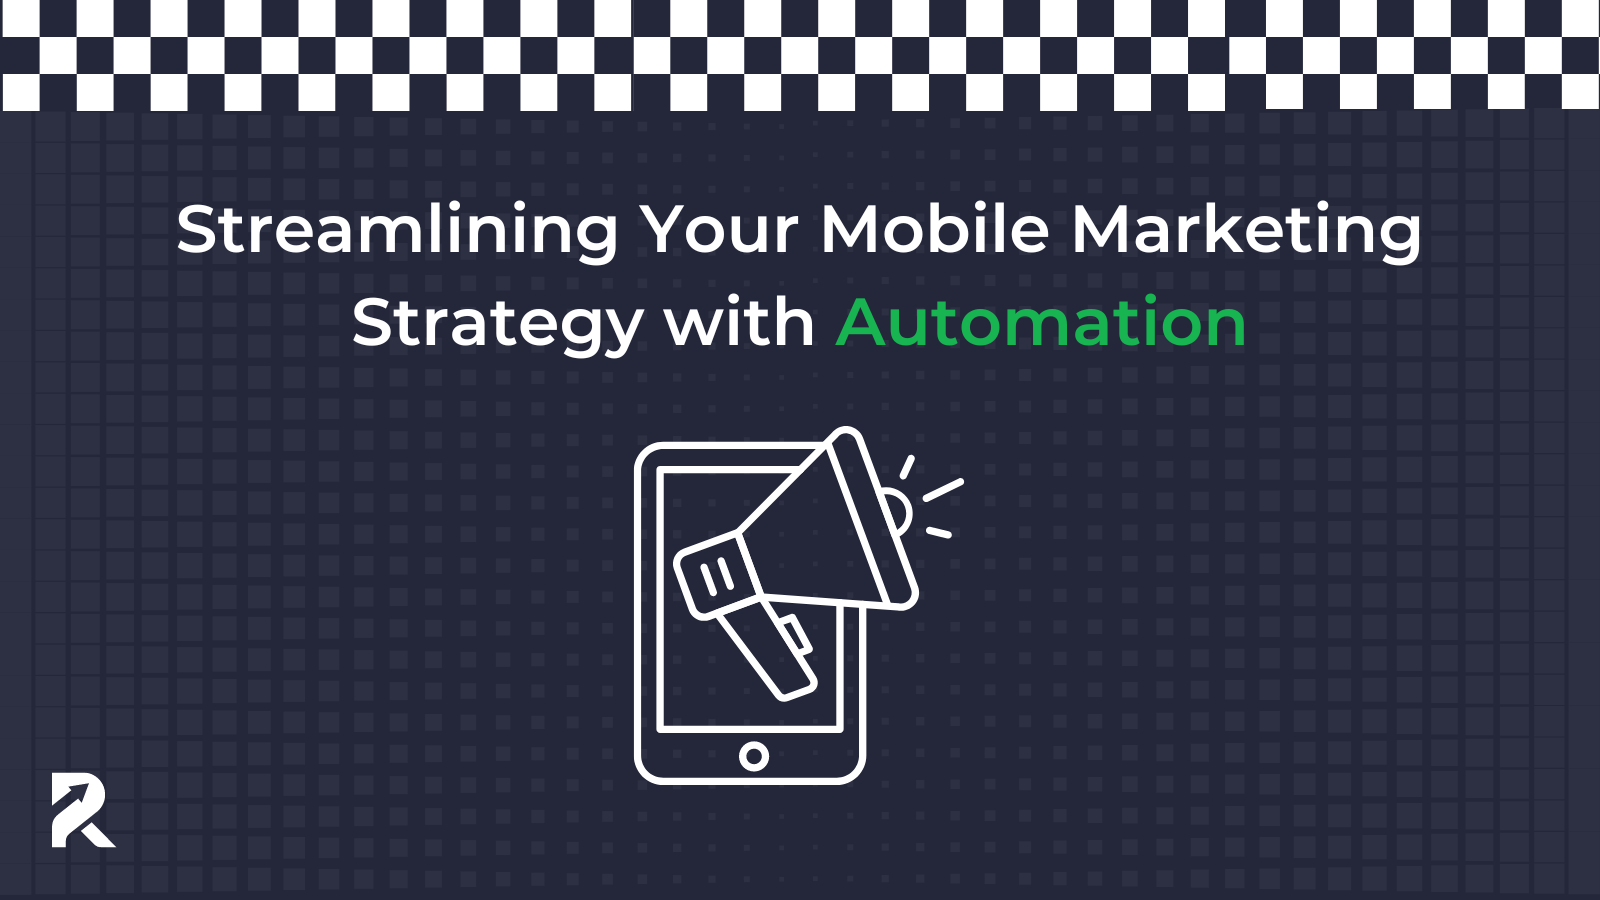 Streamlining Your Mobile Marketing Strategy with Automation